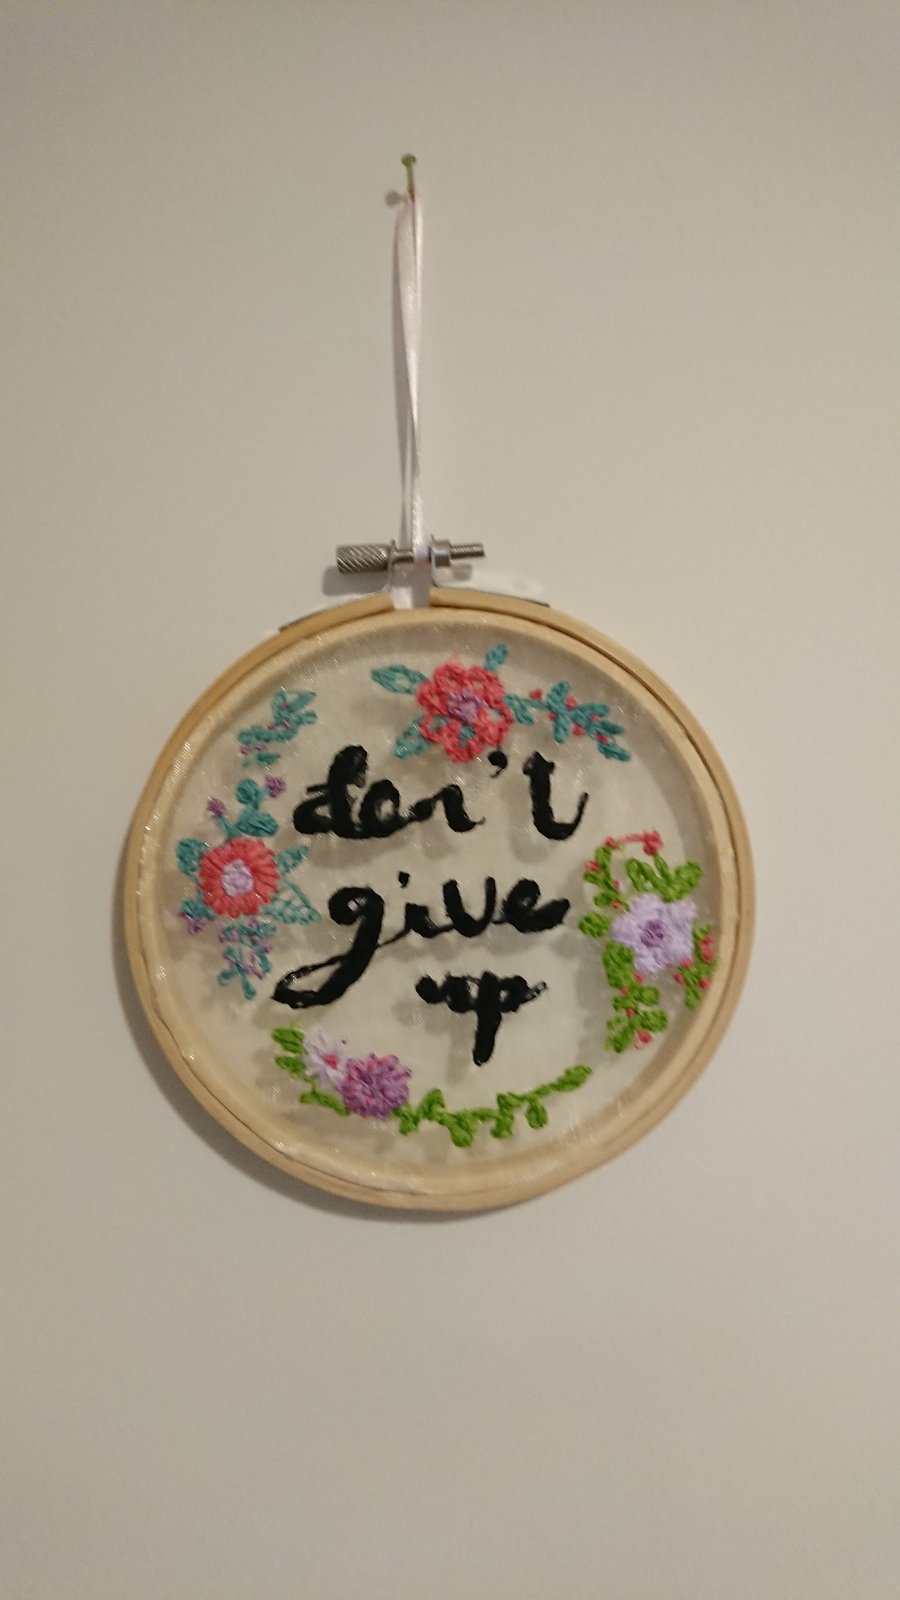 Organza embroidery hoop picture, 'Don't Give Up'. 